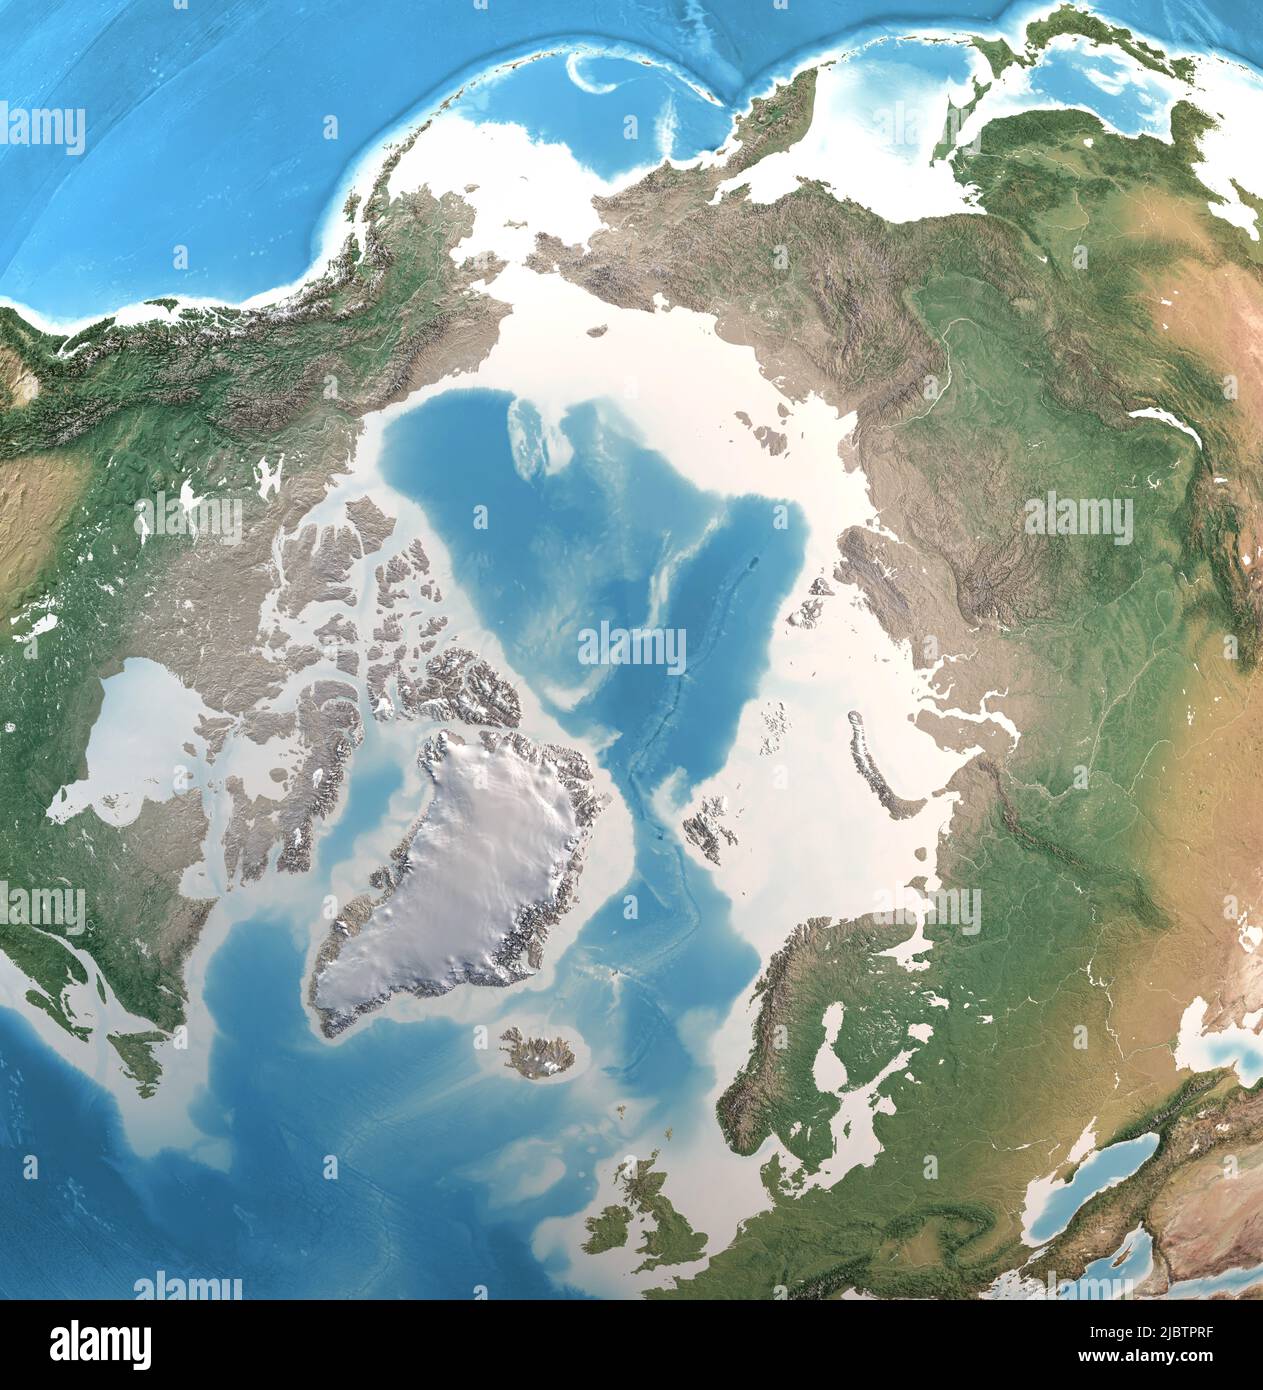 Physical map of North Pole, Arctic Ocean and Greenland, with high resolution details. Satellite view of Planet Earth. Elements furnished by NASA Stock Photo